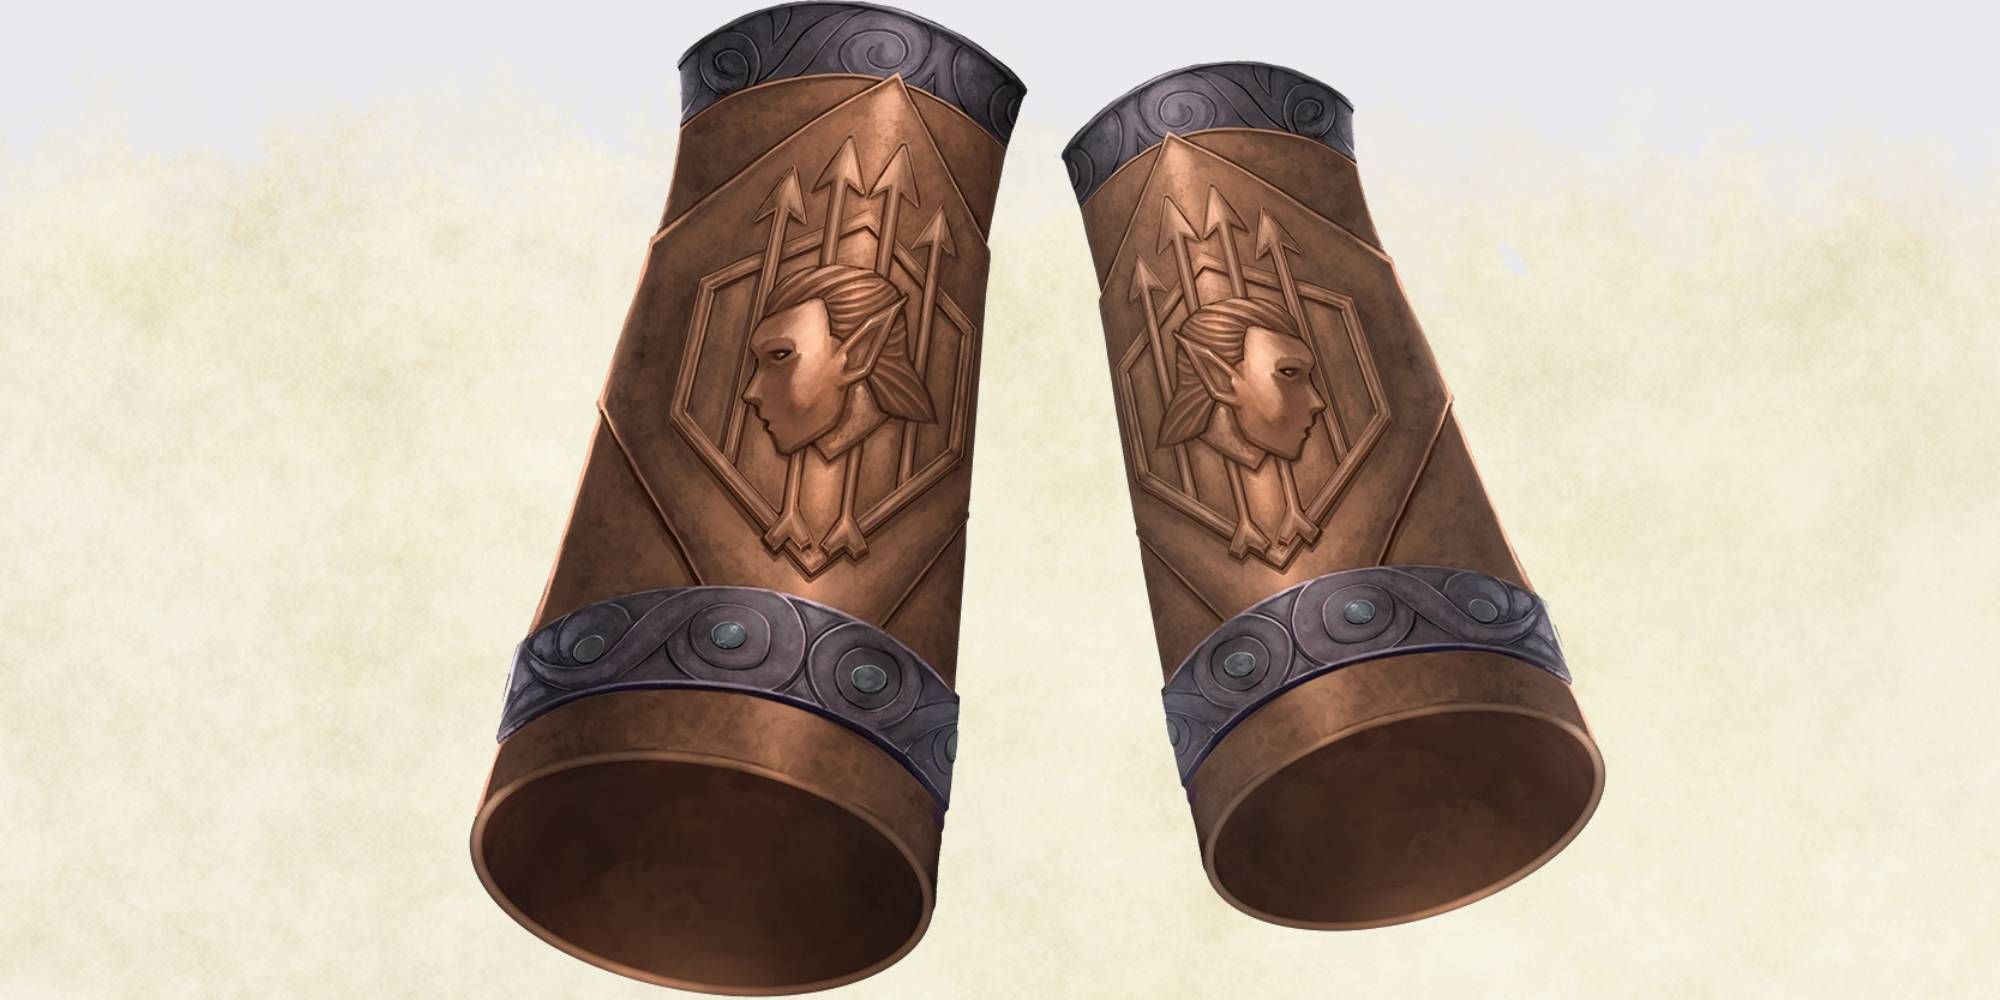 A pair of bracers sit with elven iconography upon them